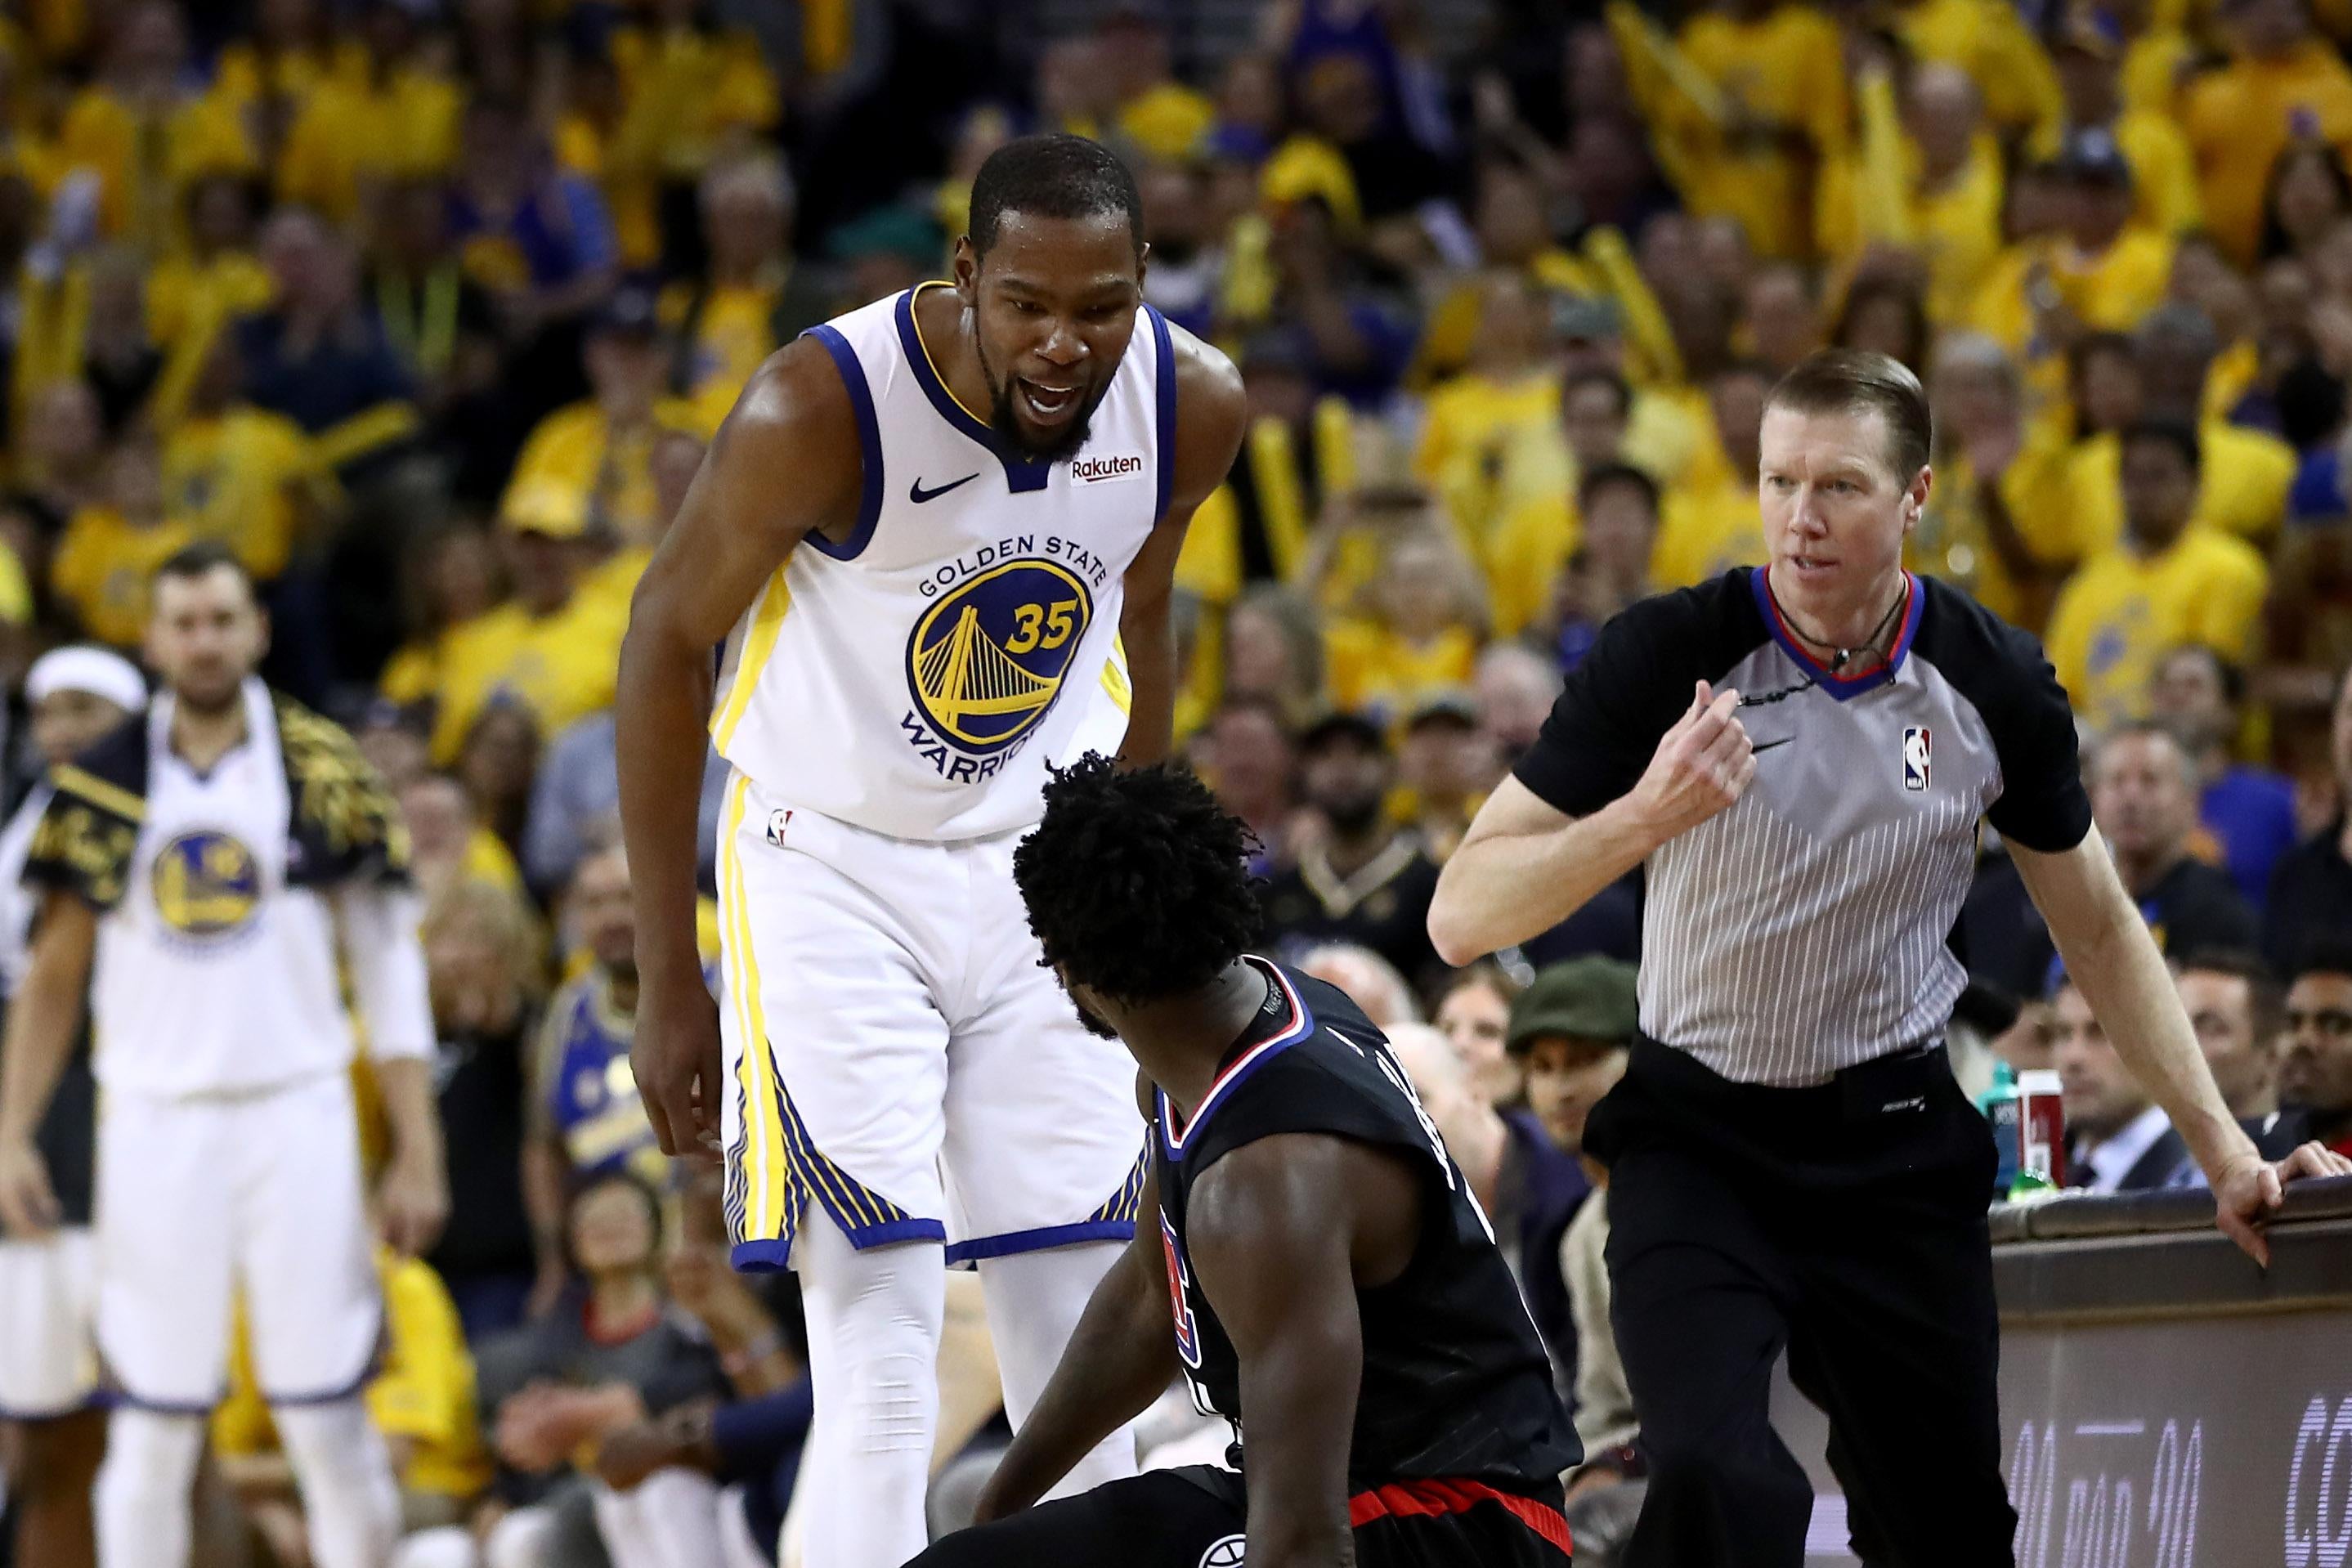 Kevin Durant stands over Patrick Beverley, who has fallen on the court. A ref moves to intervene.